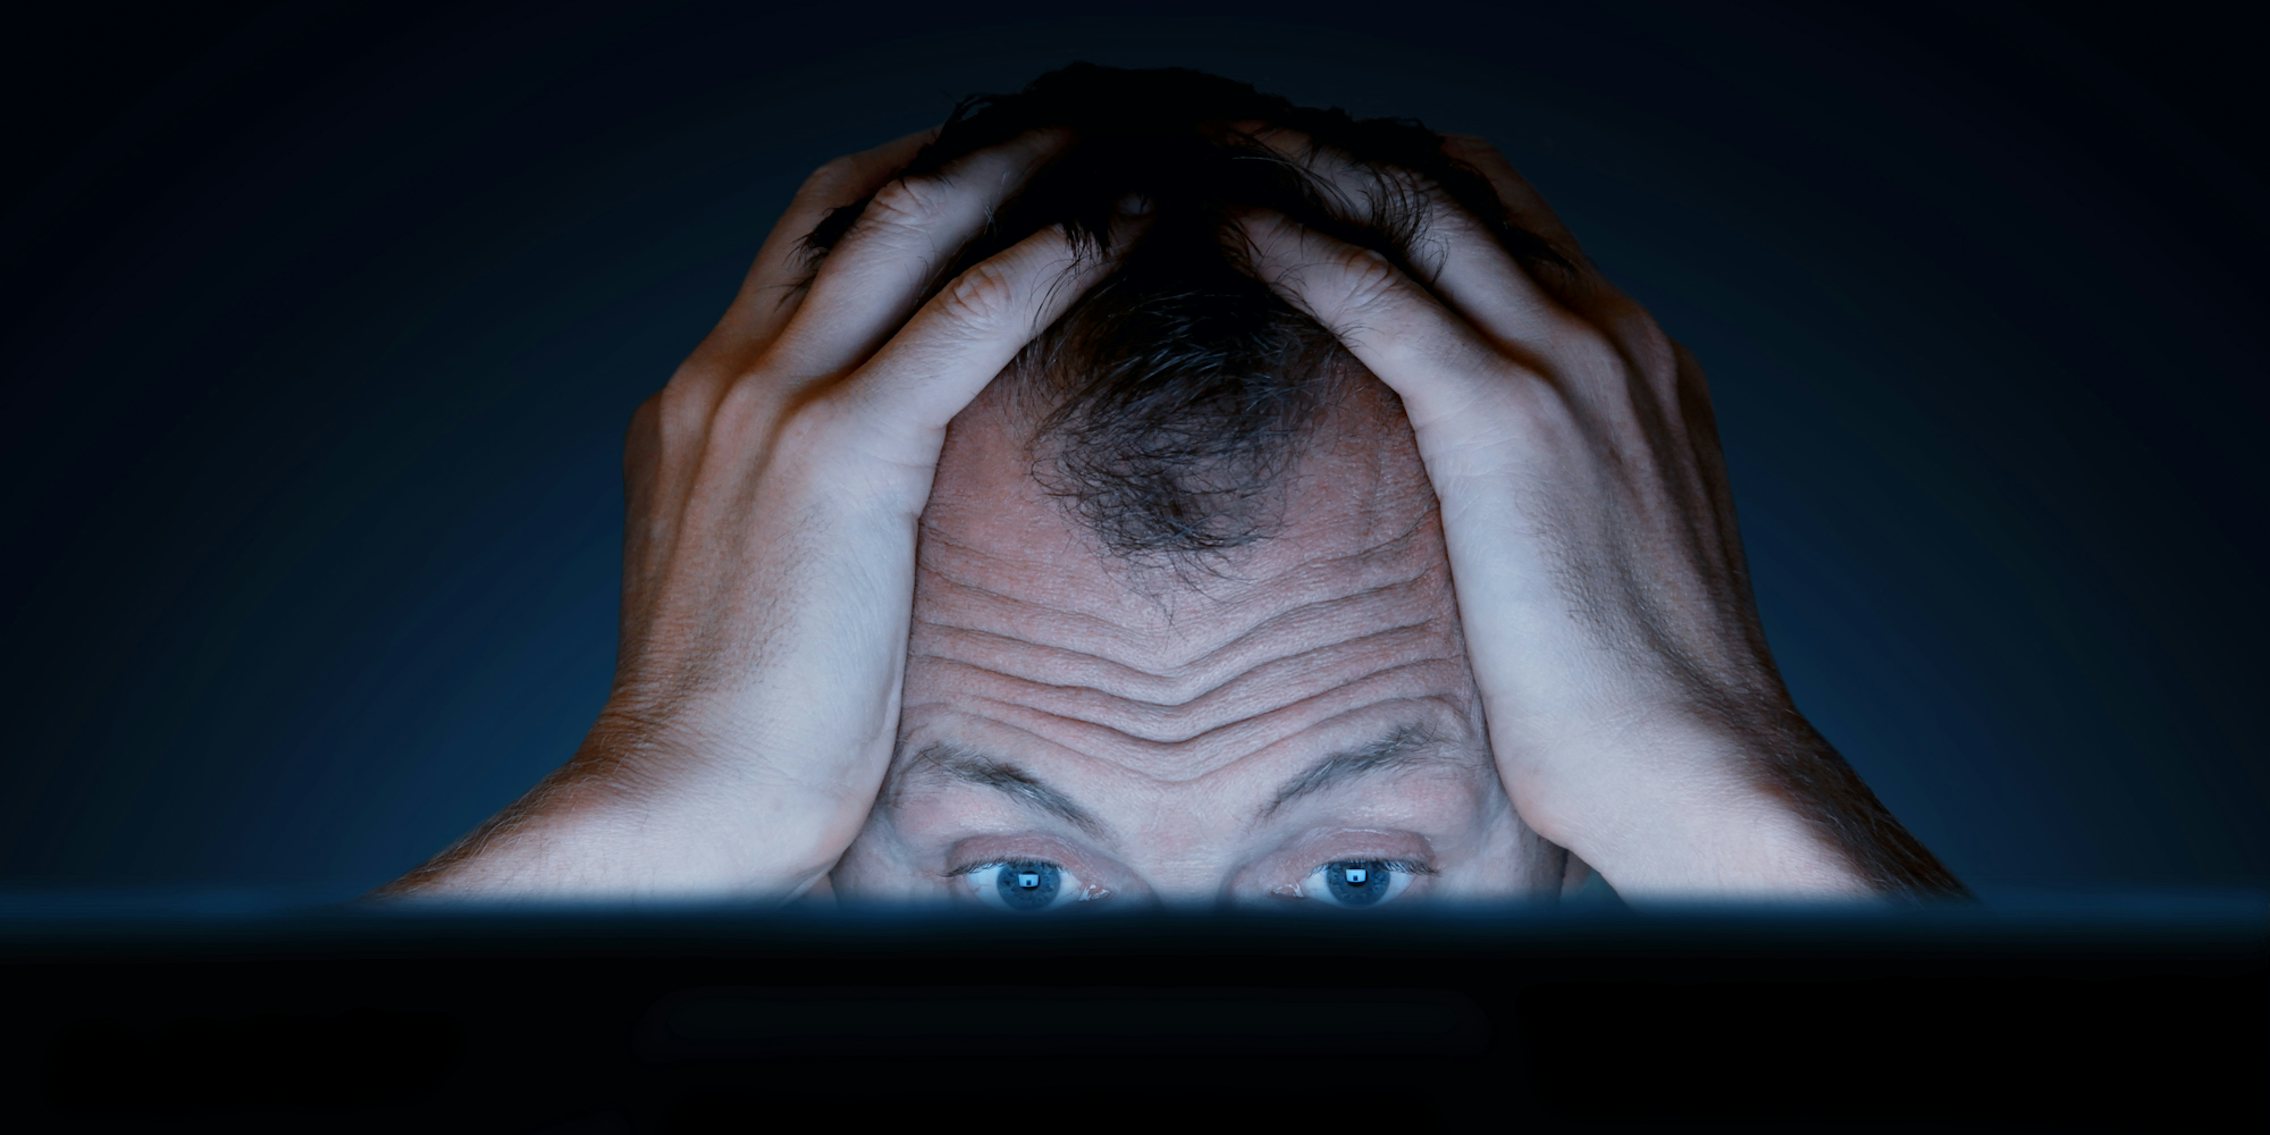 A man with his hands on his head looking frustrated in front of a computer.